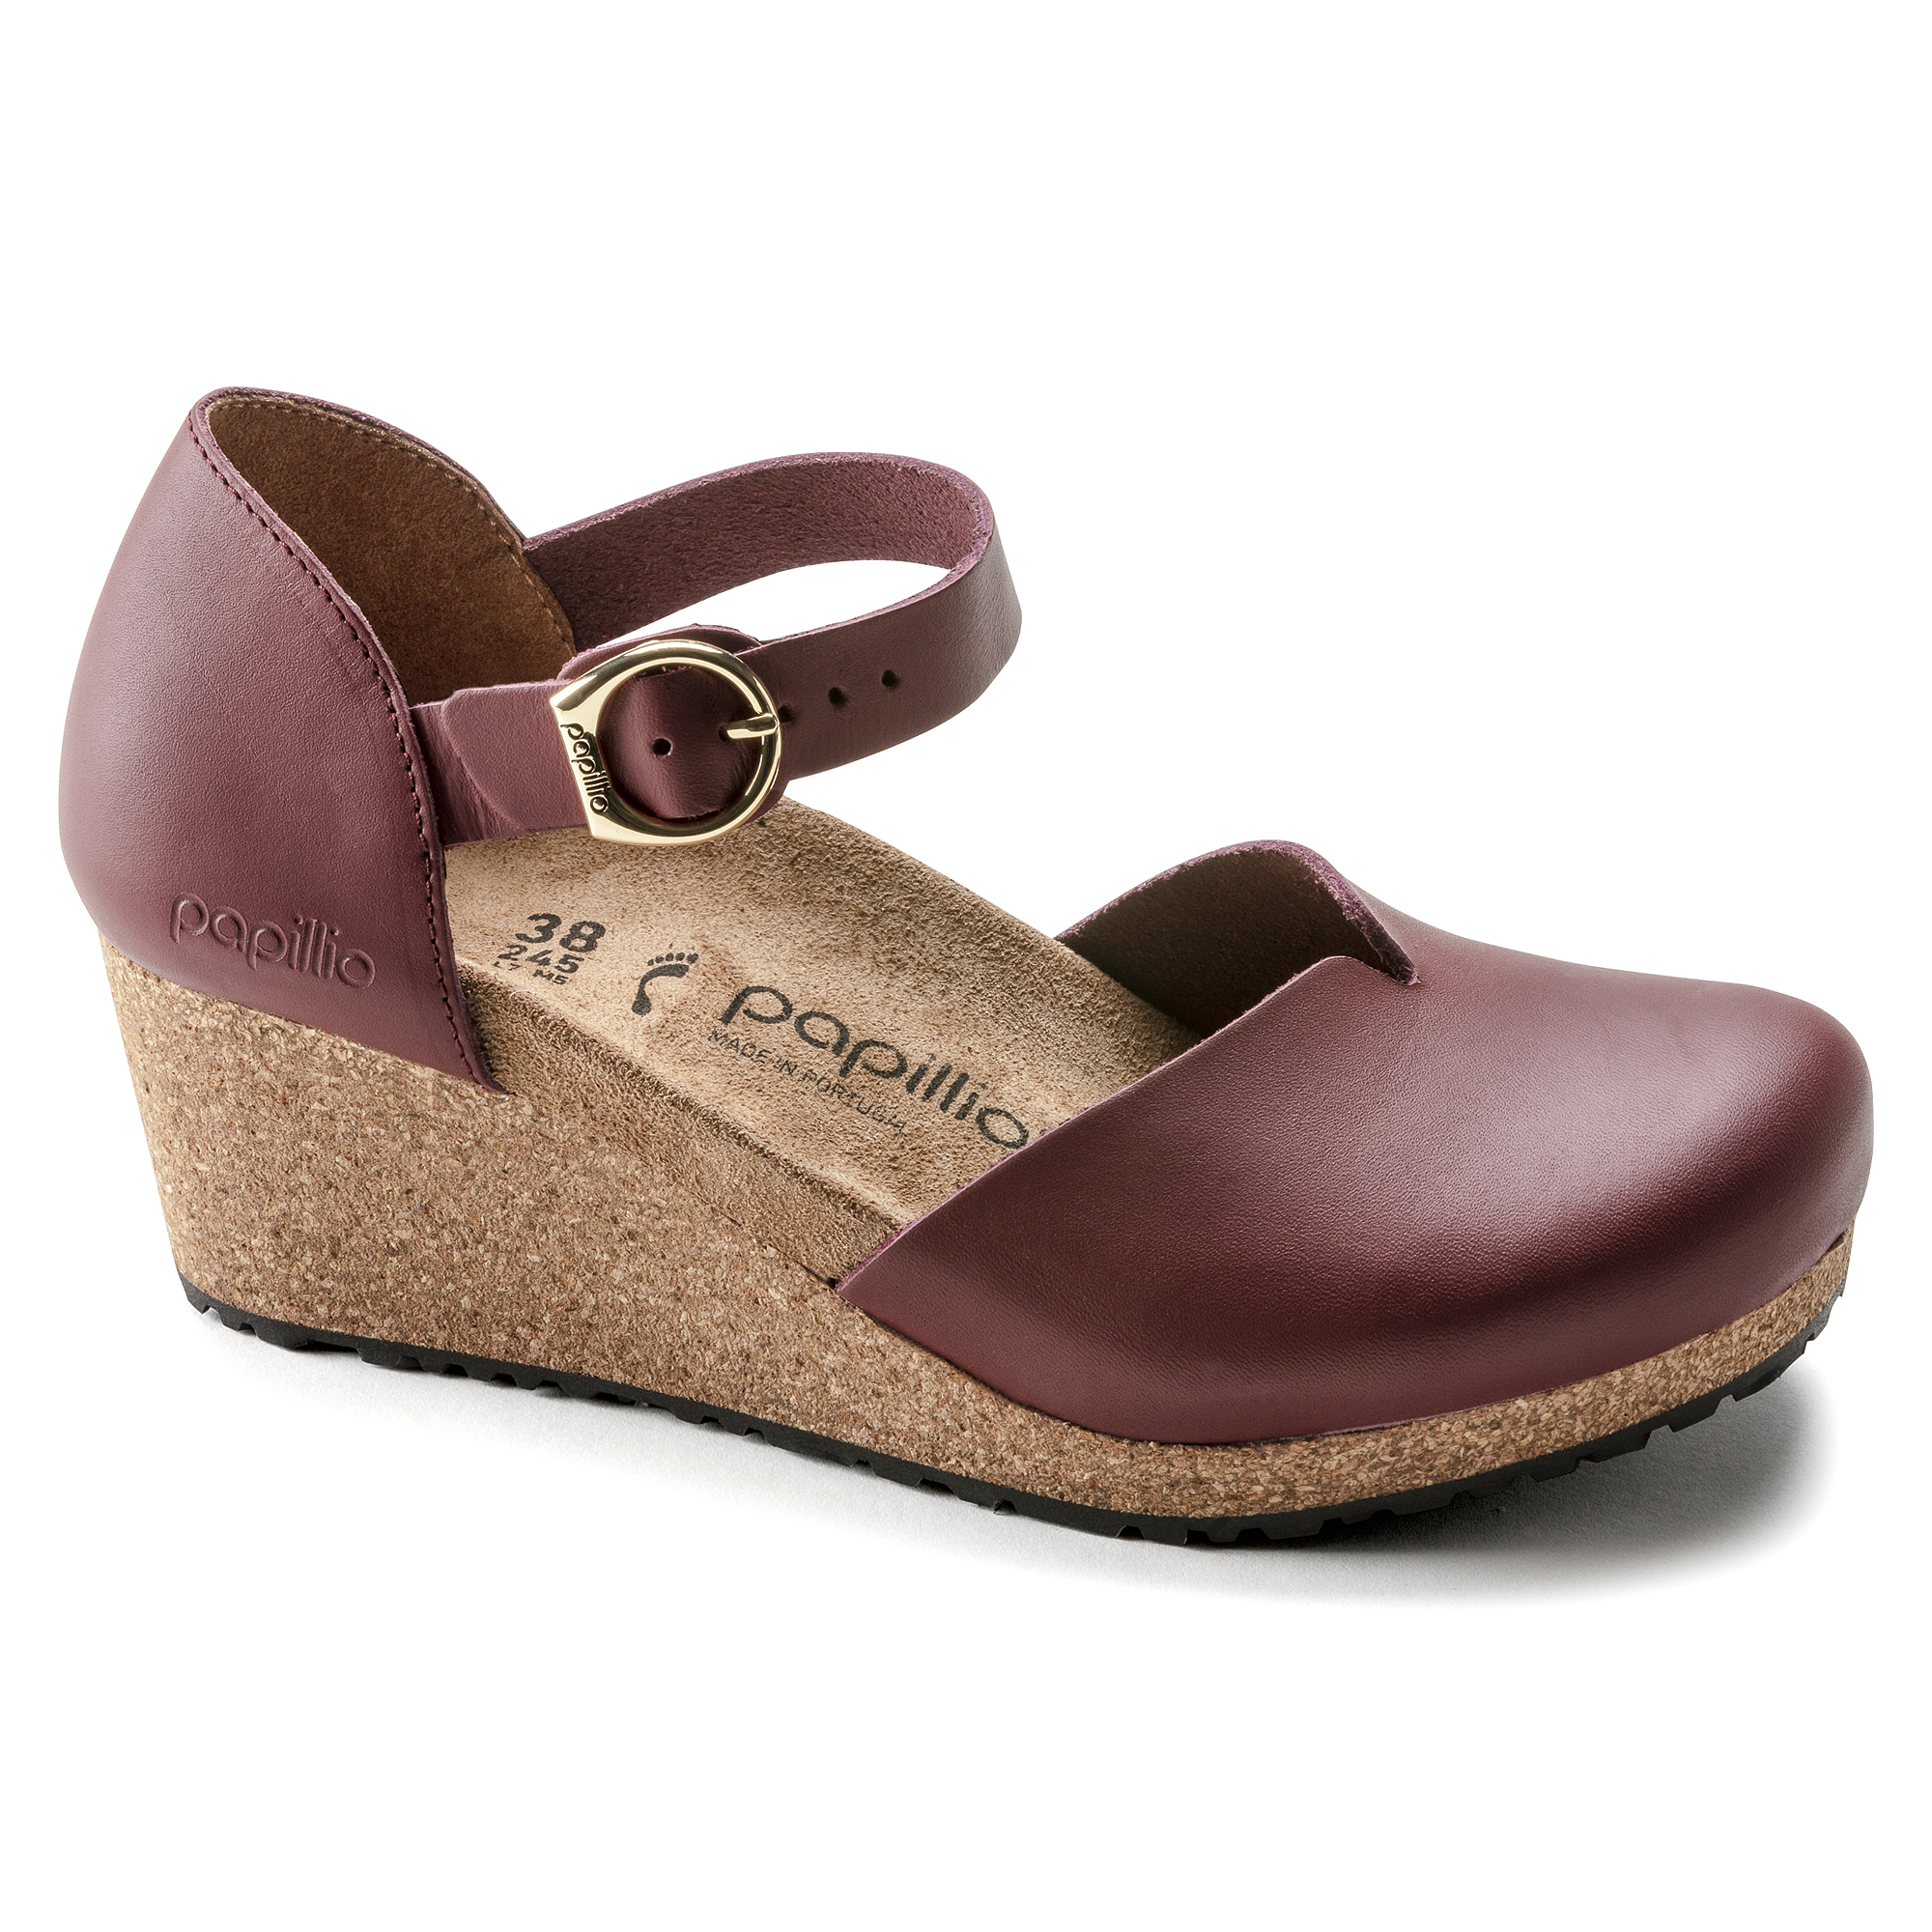 Mary Leather | shop online at BIRKENSTOCK